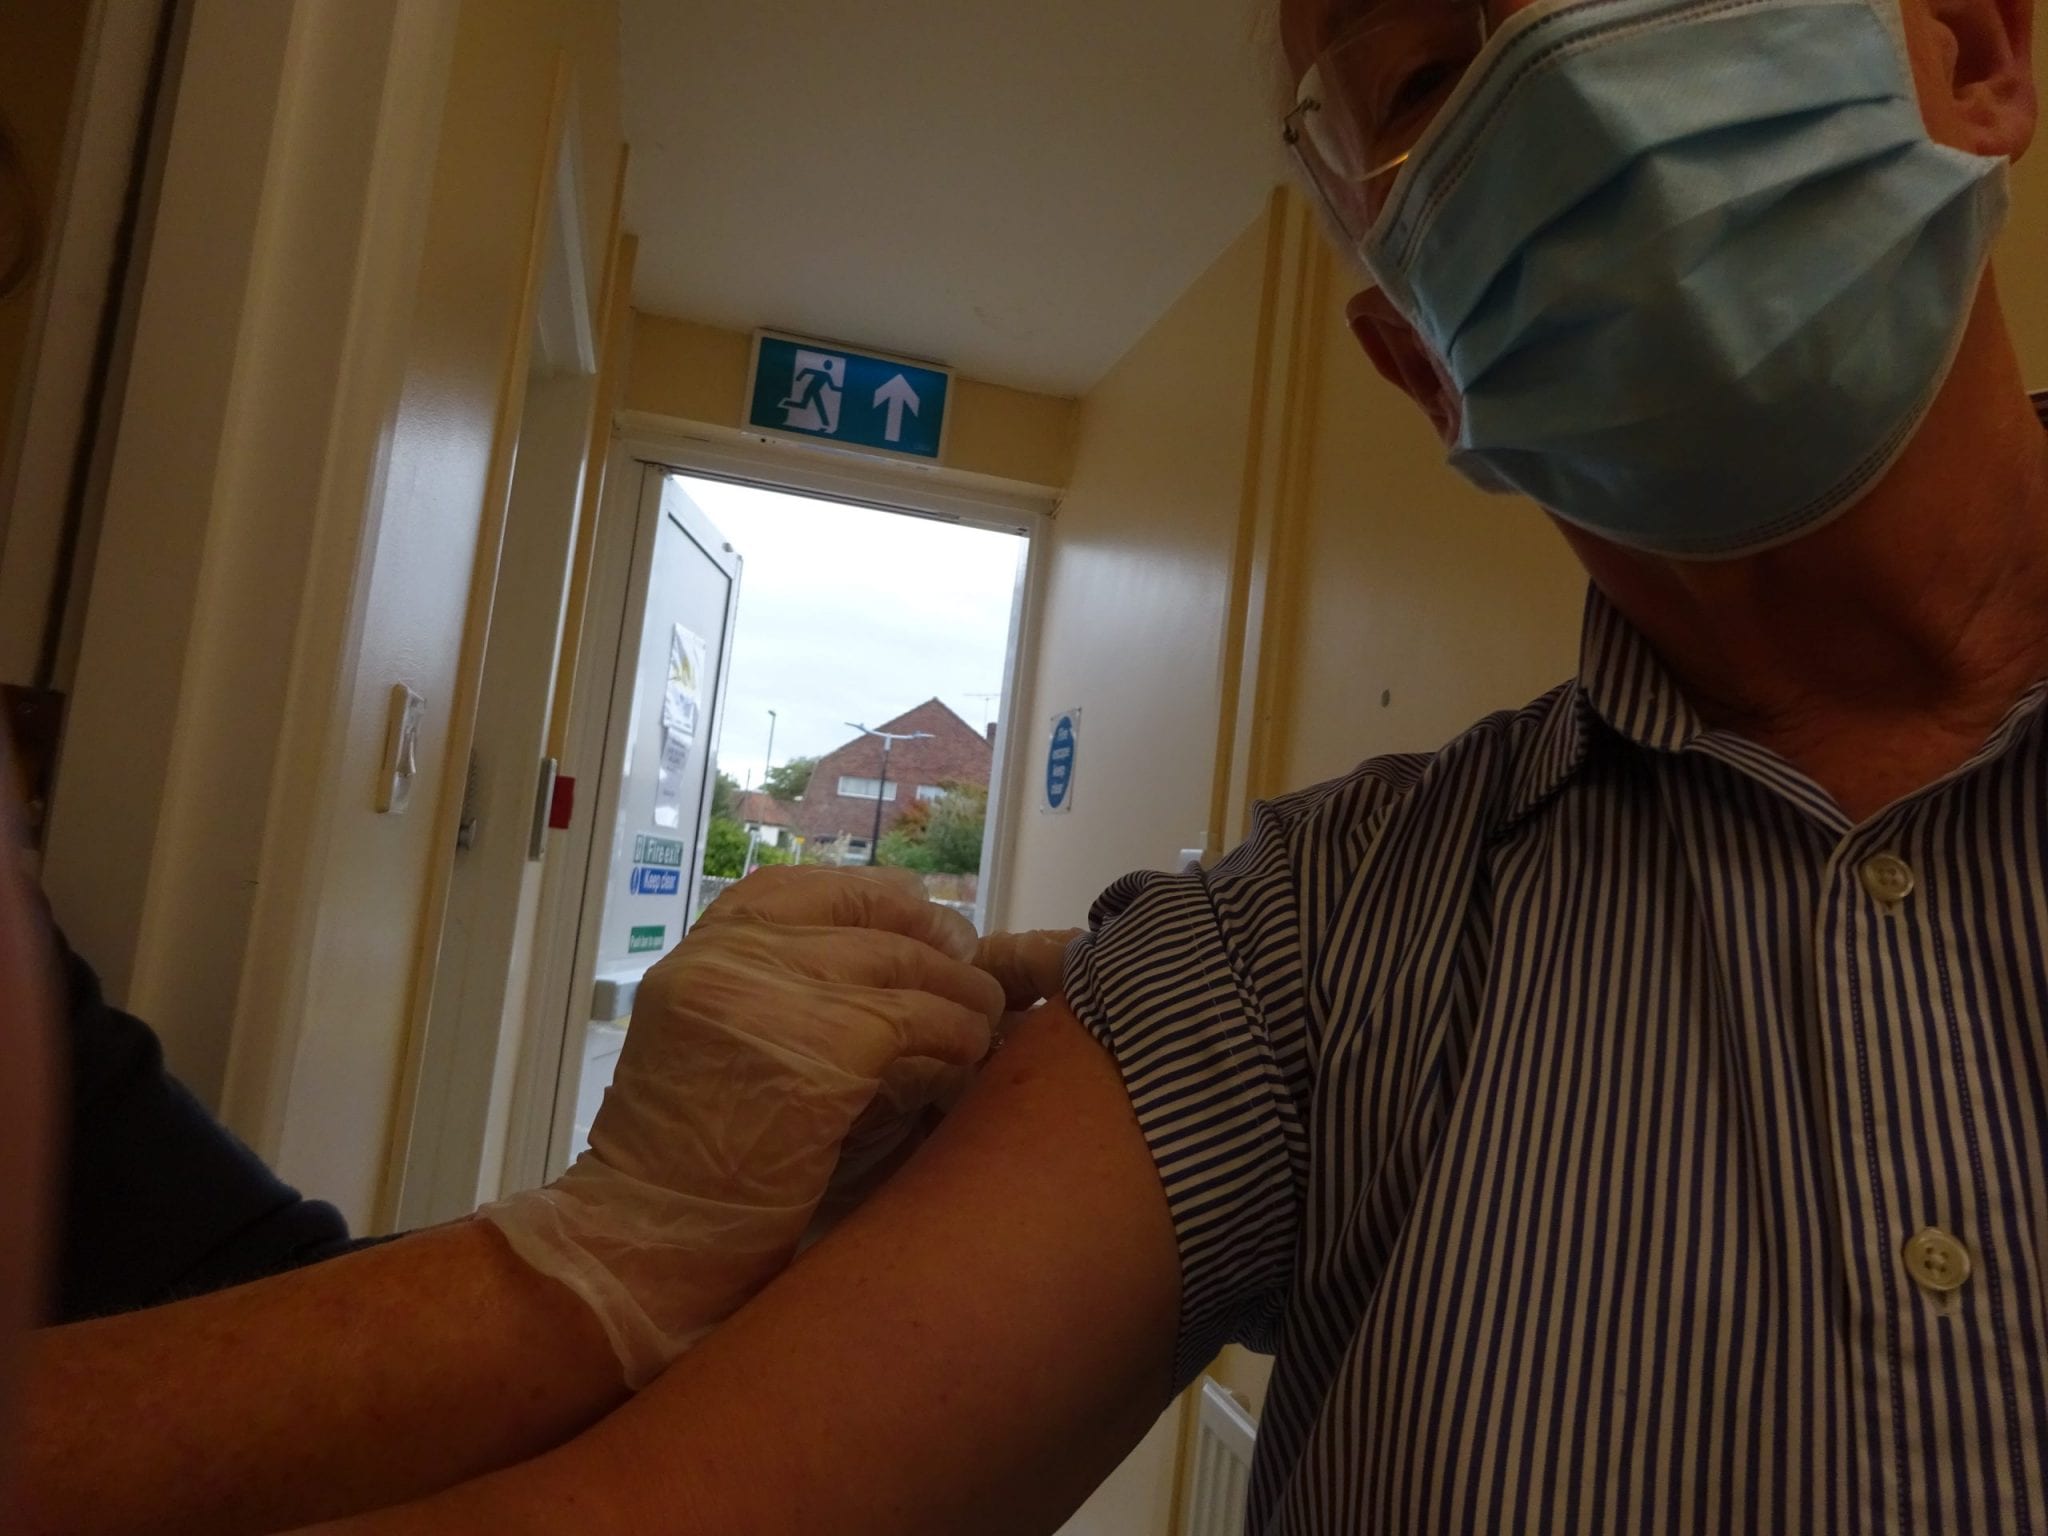 Make plans to get your flu vaccination now